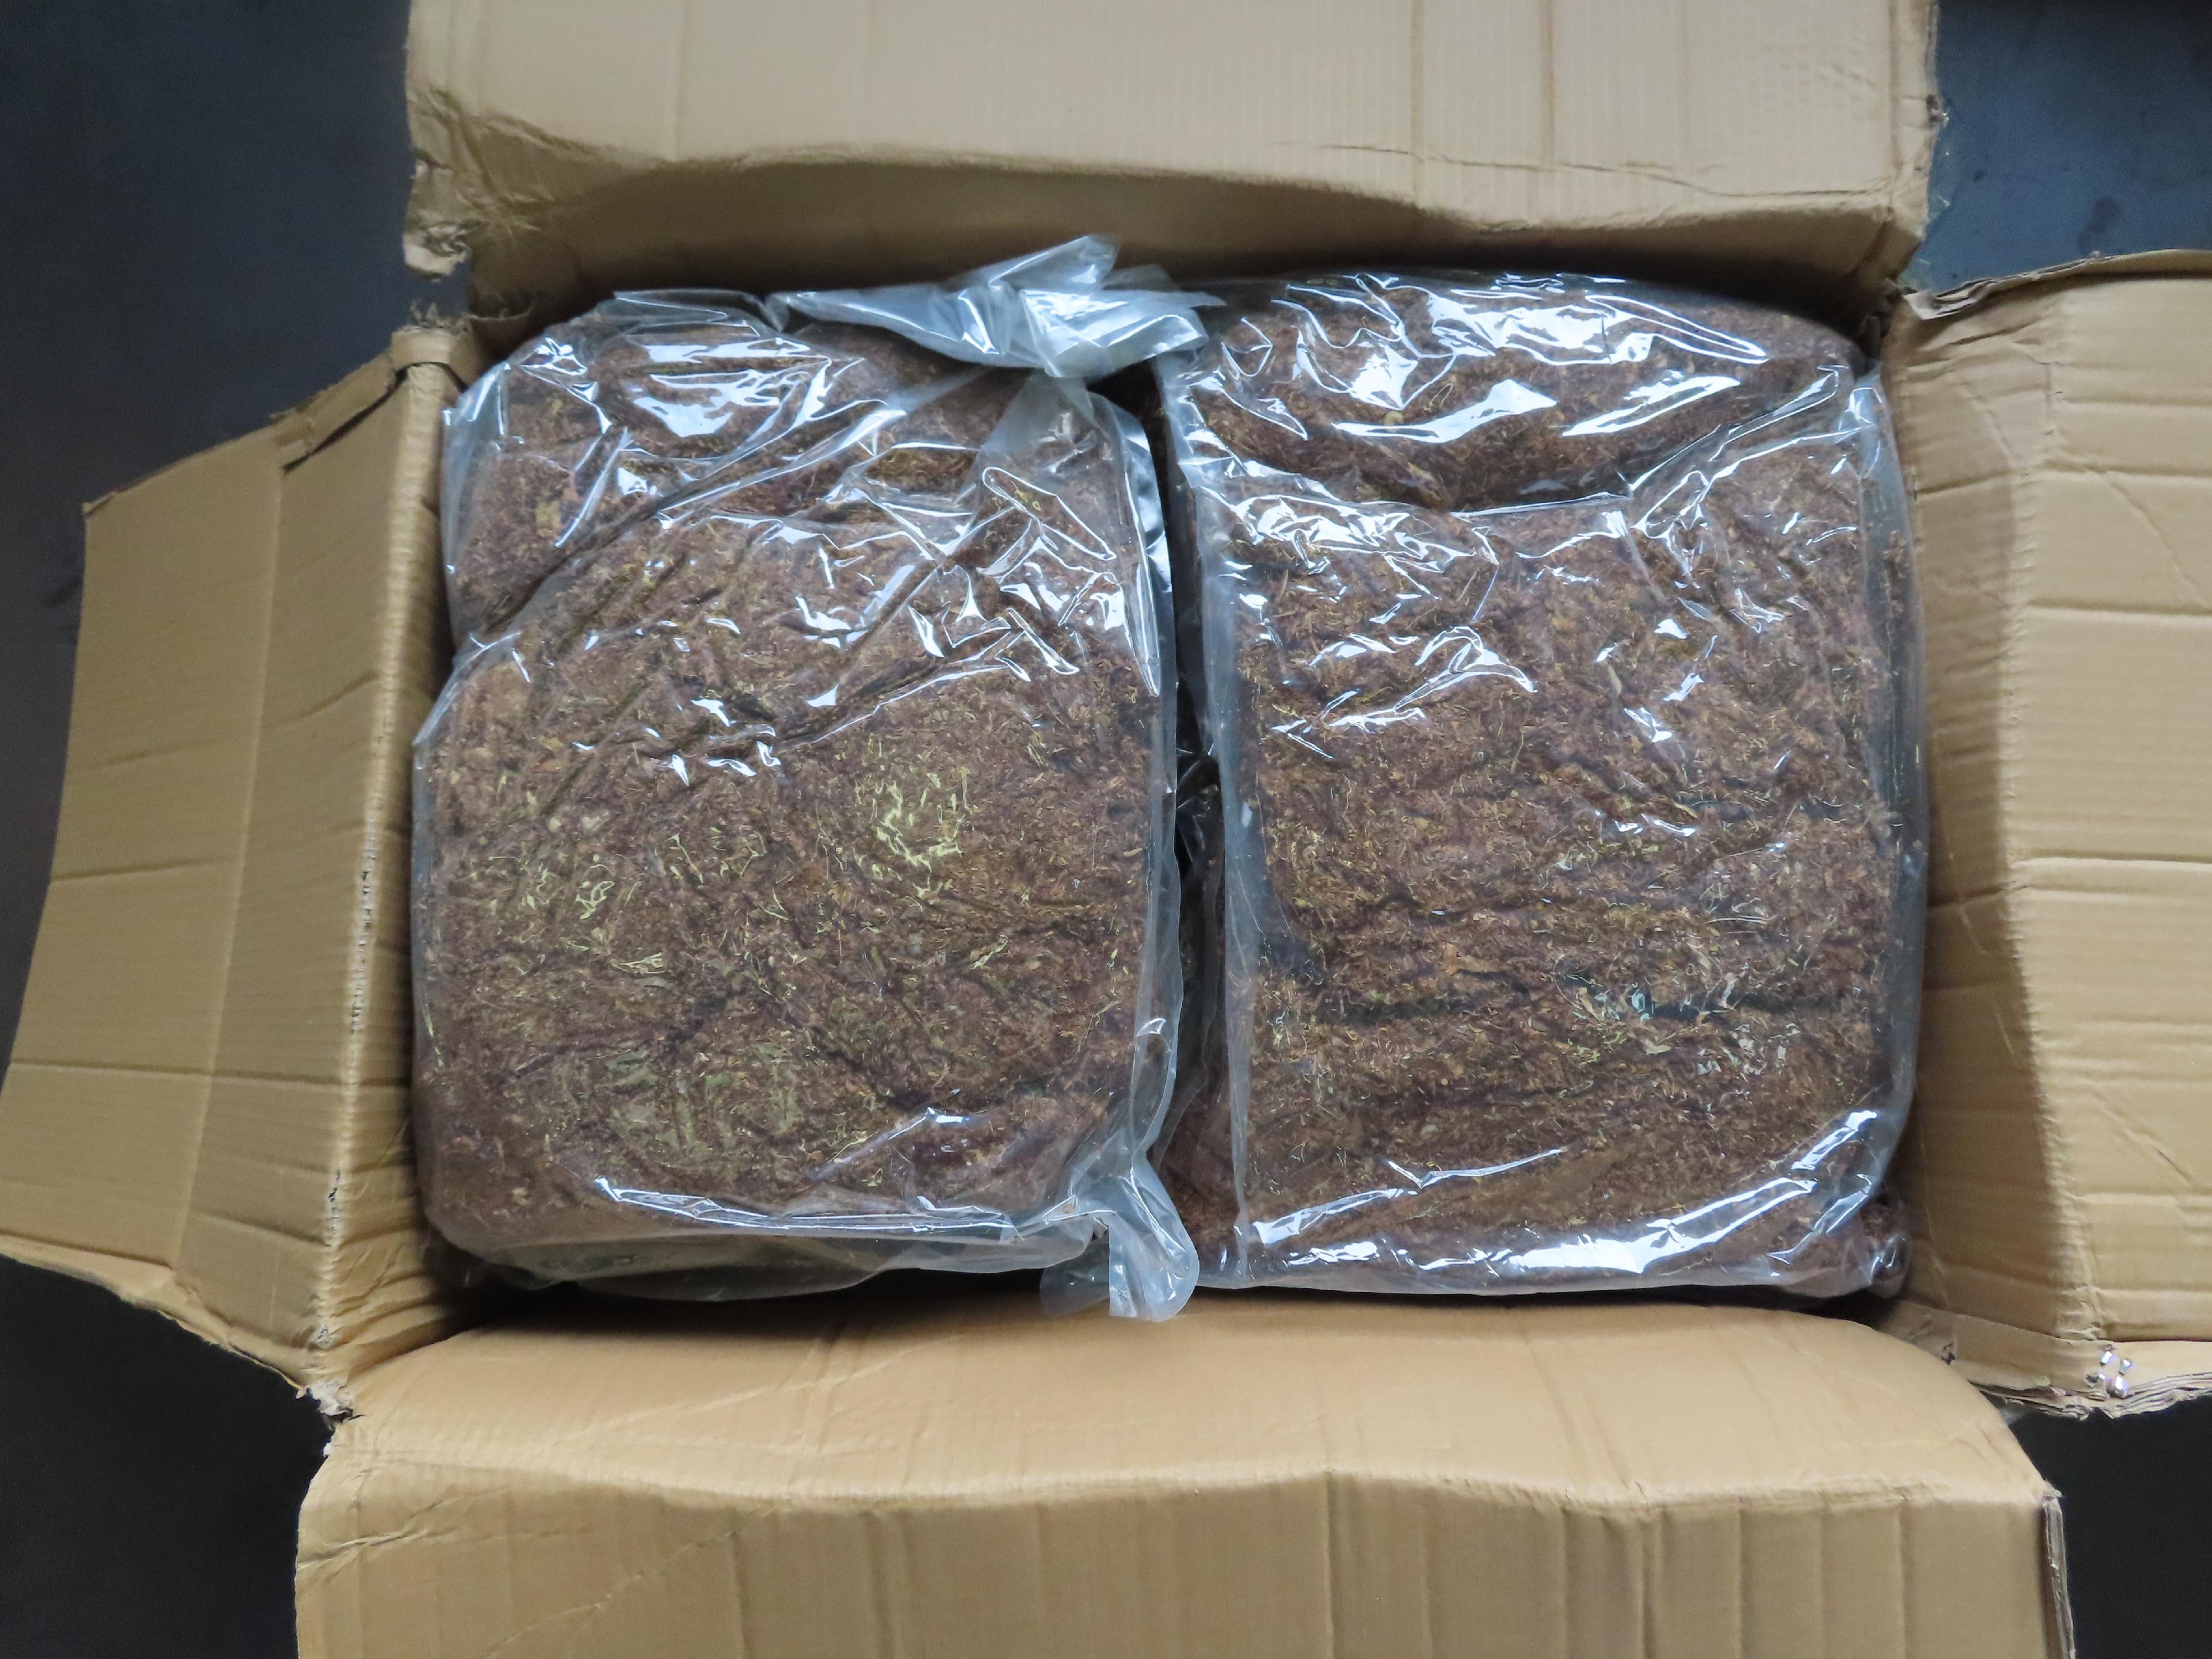 Hong Kong Customs detected two suspected smuggling cases at the Kwai Chung Customhouse Cargo Examination Compound on June 2 and yesterday (June 5). A total of about 11.6 tonnes of suspected duty-not-paid manufactured tobacco, with an estimated market value of over $52 million and a duty potential of about $35 million, were seized. Photo shows some suspected duty-not-paid manufactured tobacco packed in transparent plastic bags found by Customs officers in the first case.